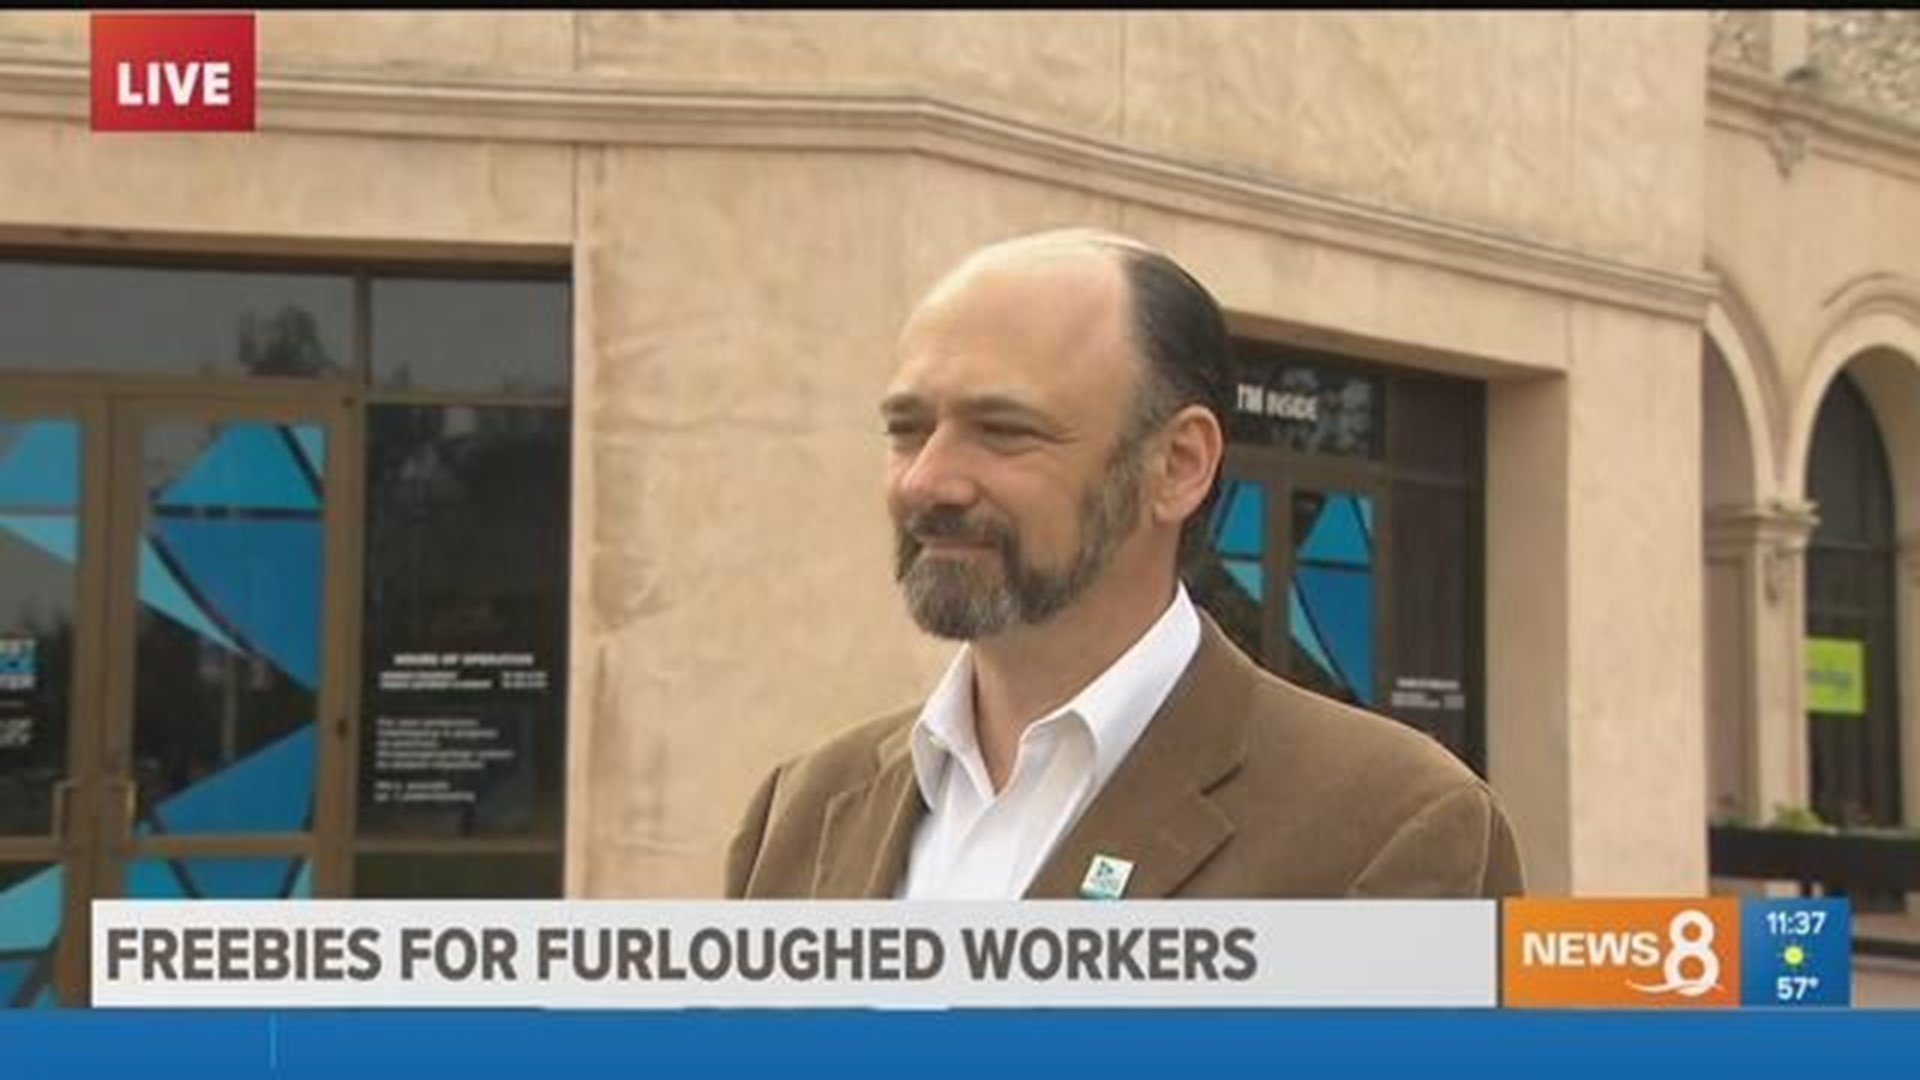 San Diego businesses offer freebies to furloughed workers